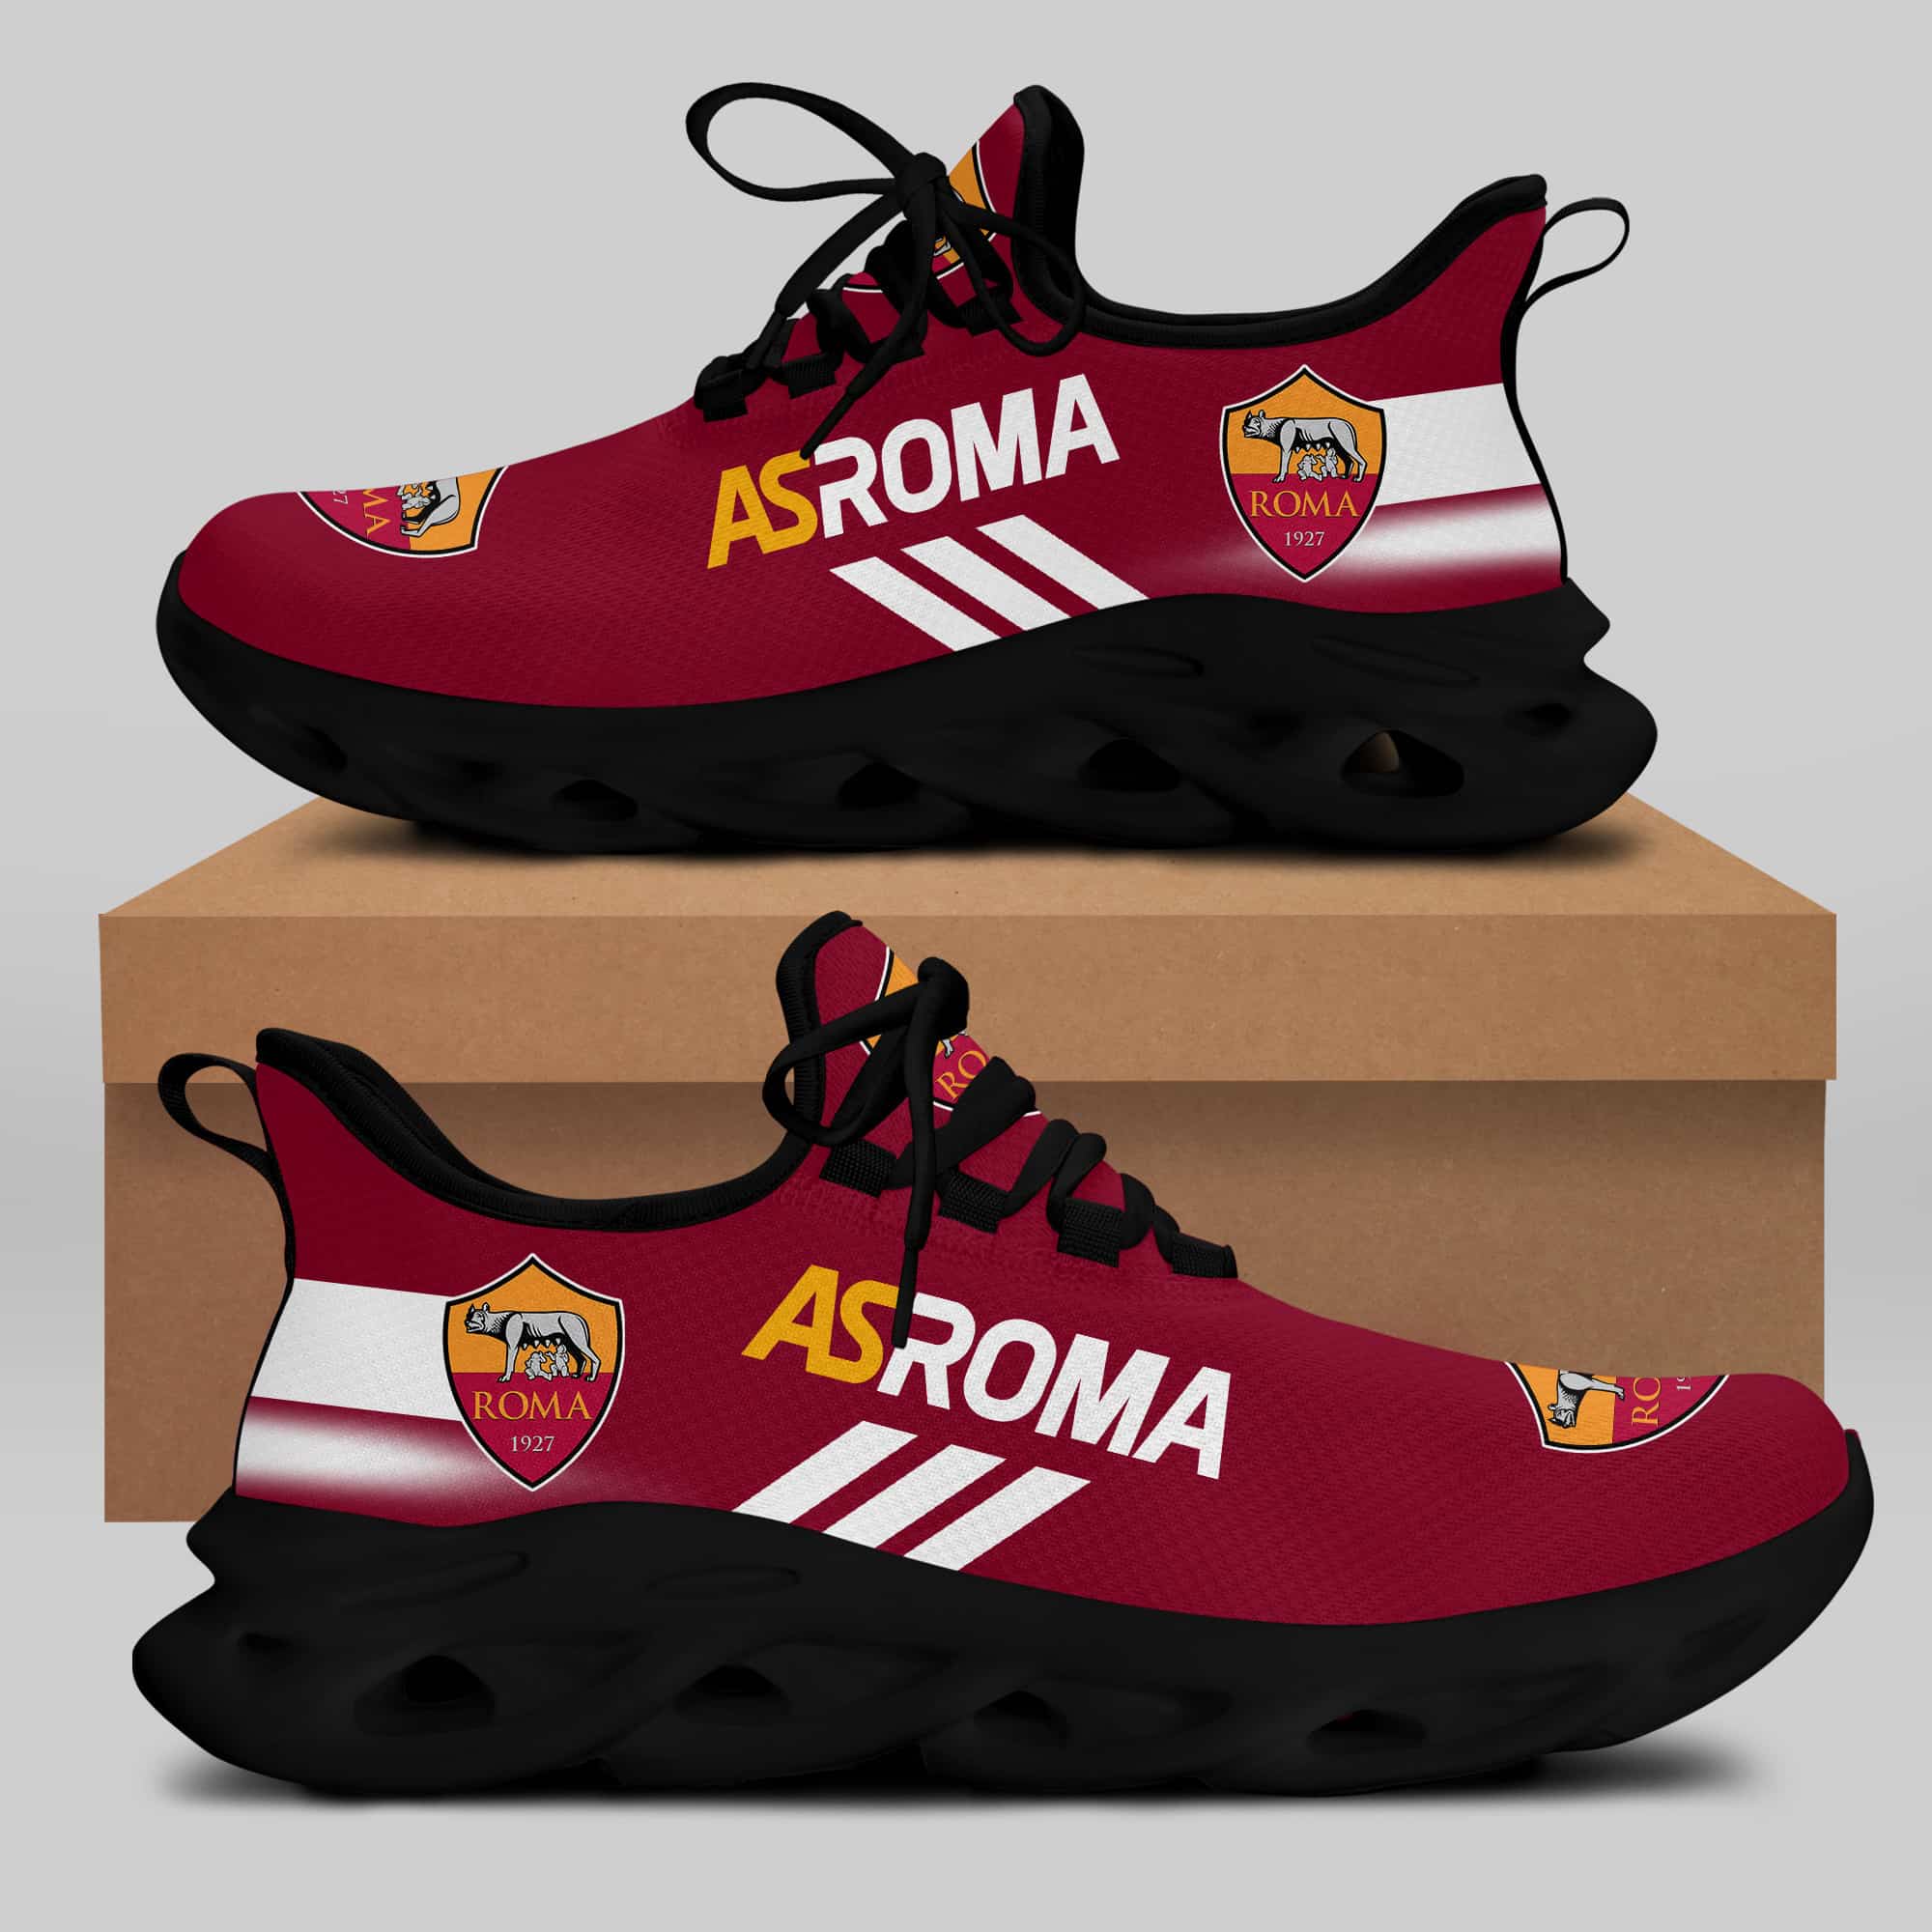 As Roma Running Shoes Max Soul Shoes Sneakers Ver 15 2